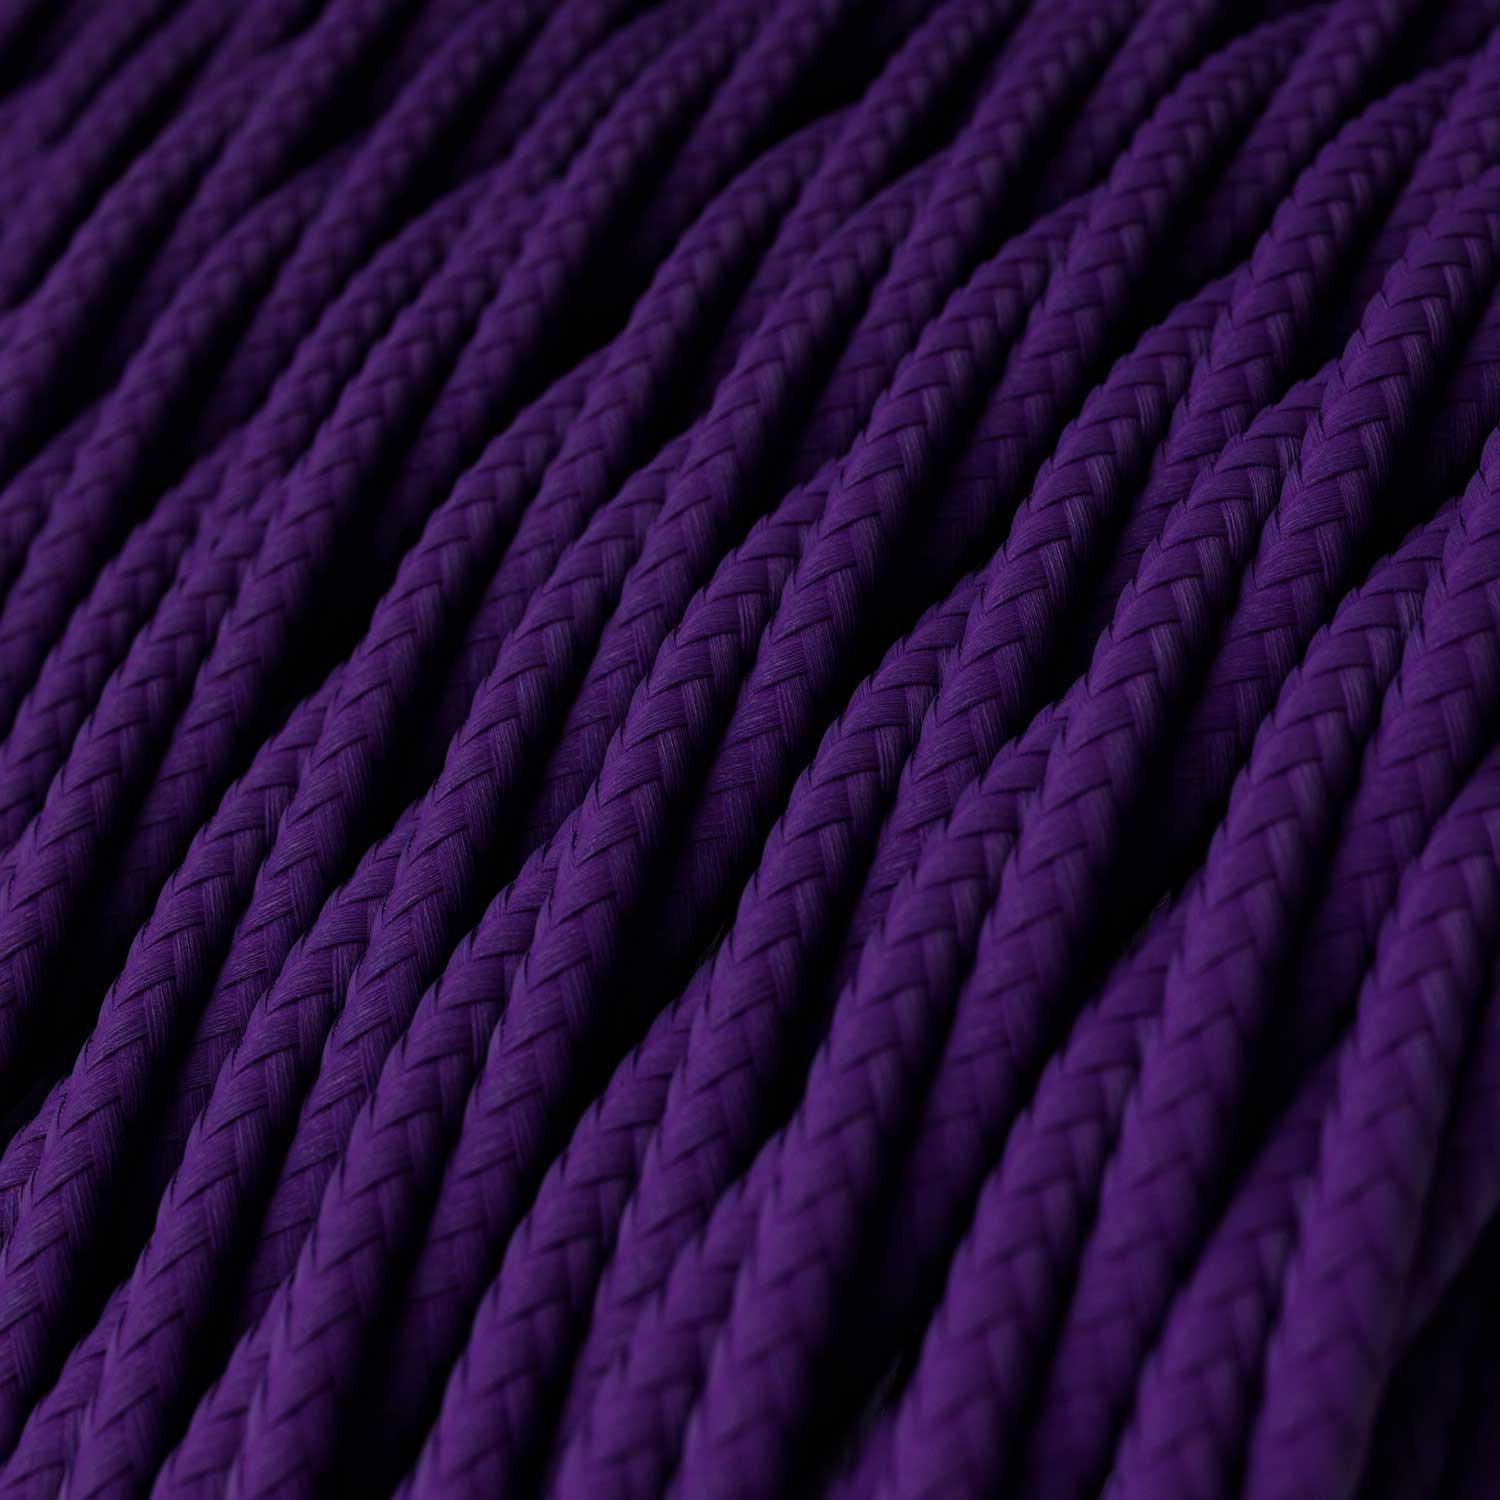 Twisted Electric Cable covered by Rayon solid color fabric TM14 Violet